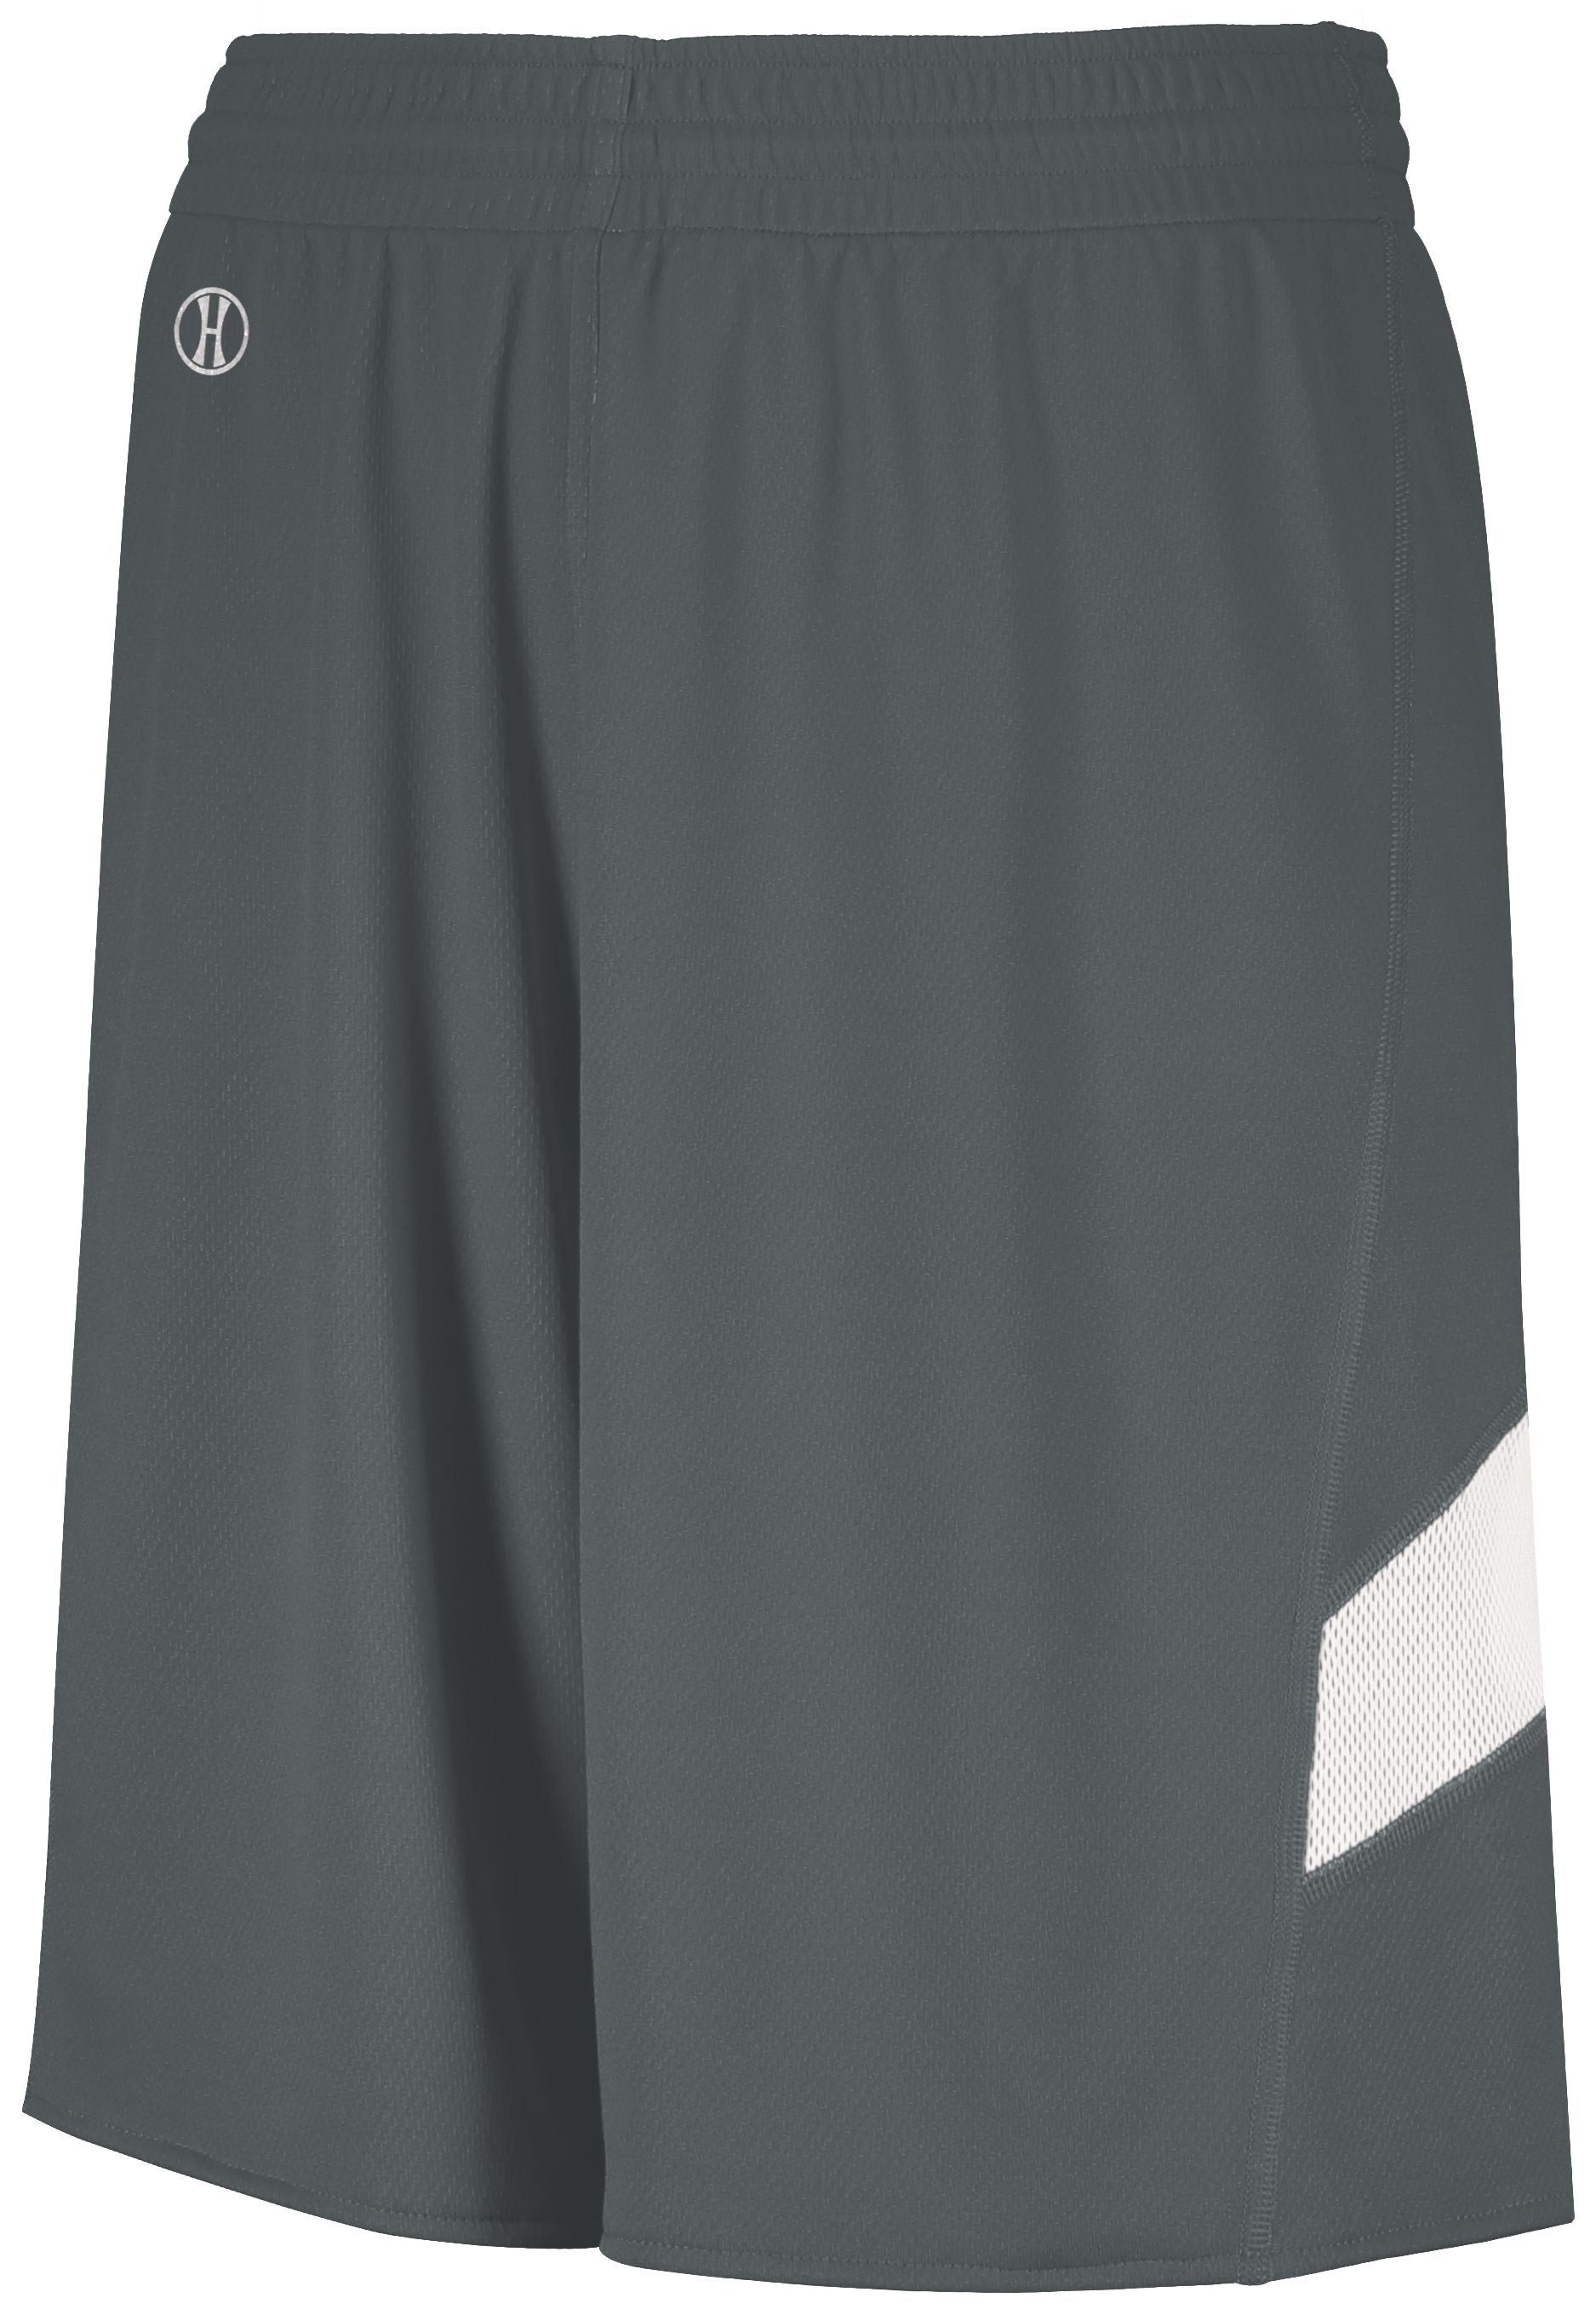 Holloway Dual-Side Single Ply Shorts in Graphite/White  -Part of the Adult, Adult-Shorts, Basketball, Holloway, All-Sports, All-Sports-1 product lines at KanaleyCreations.com